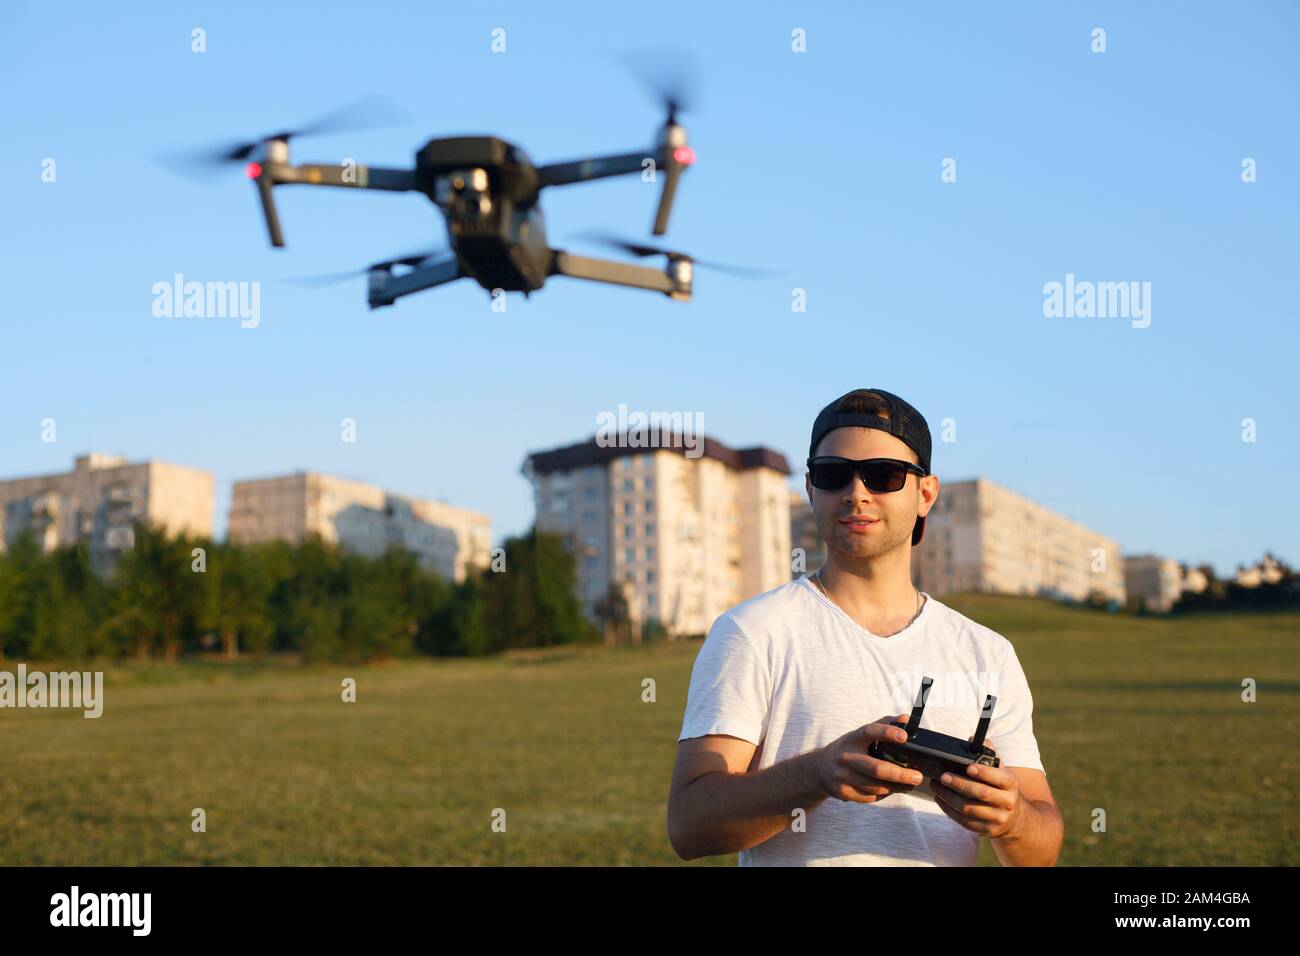 Compact drone hovers in front of man with remote controller in his hands. Quadcopter flies near pilot. Guy taking aerial photos and videos from above Stock Photo